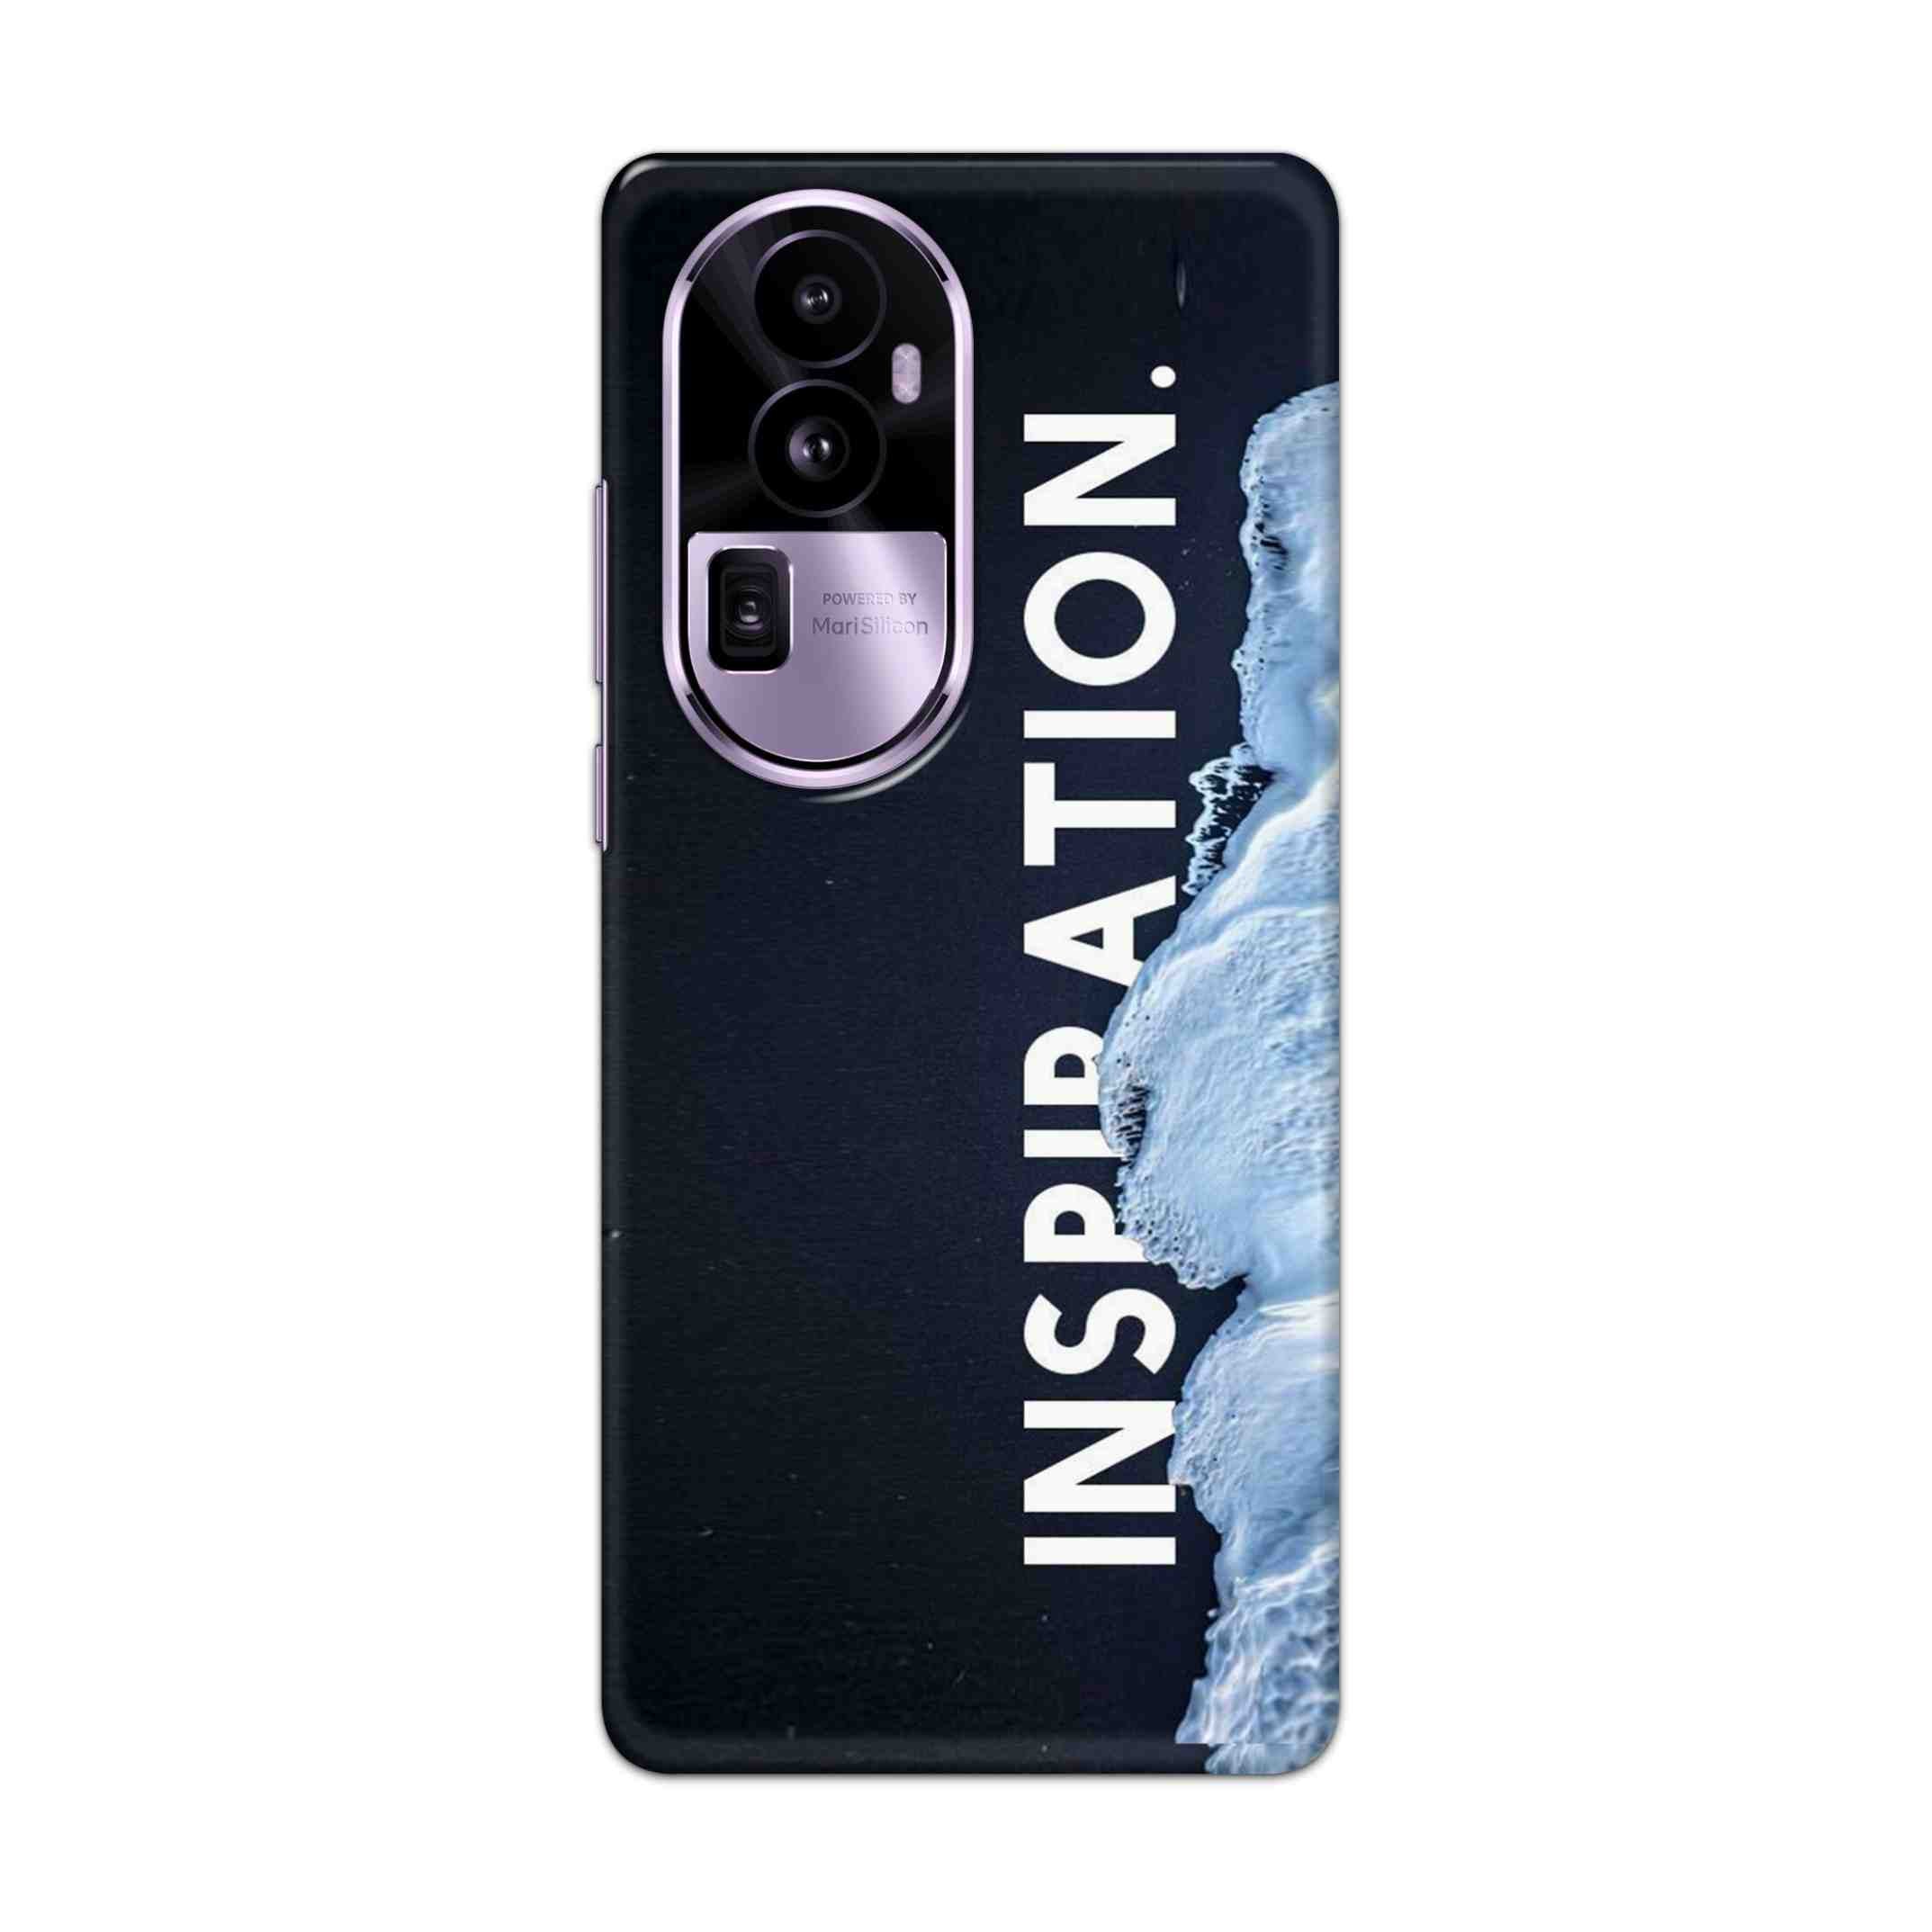 Buy Inspiration Hard Back Mobile Phone Case Cover For Oppo Reno 10 Pro Plus Online